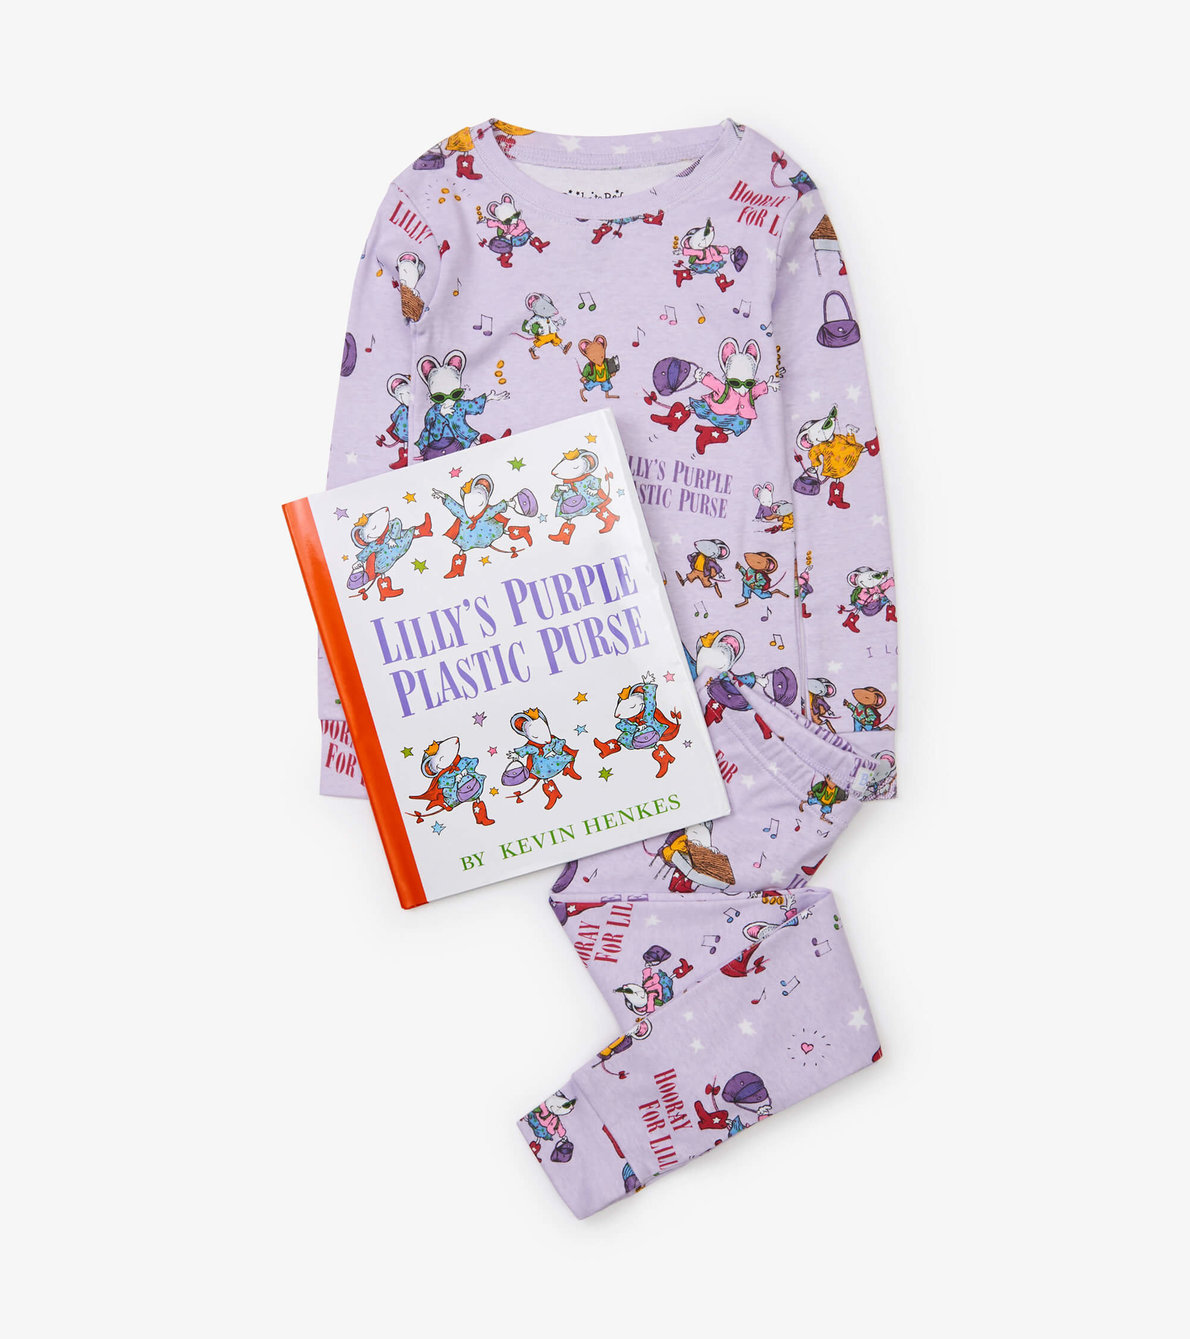 View larger image of Lilly's Purple Plastic Purse Book and Pajama Set